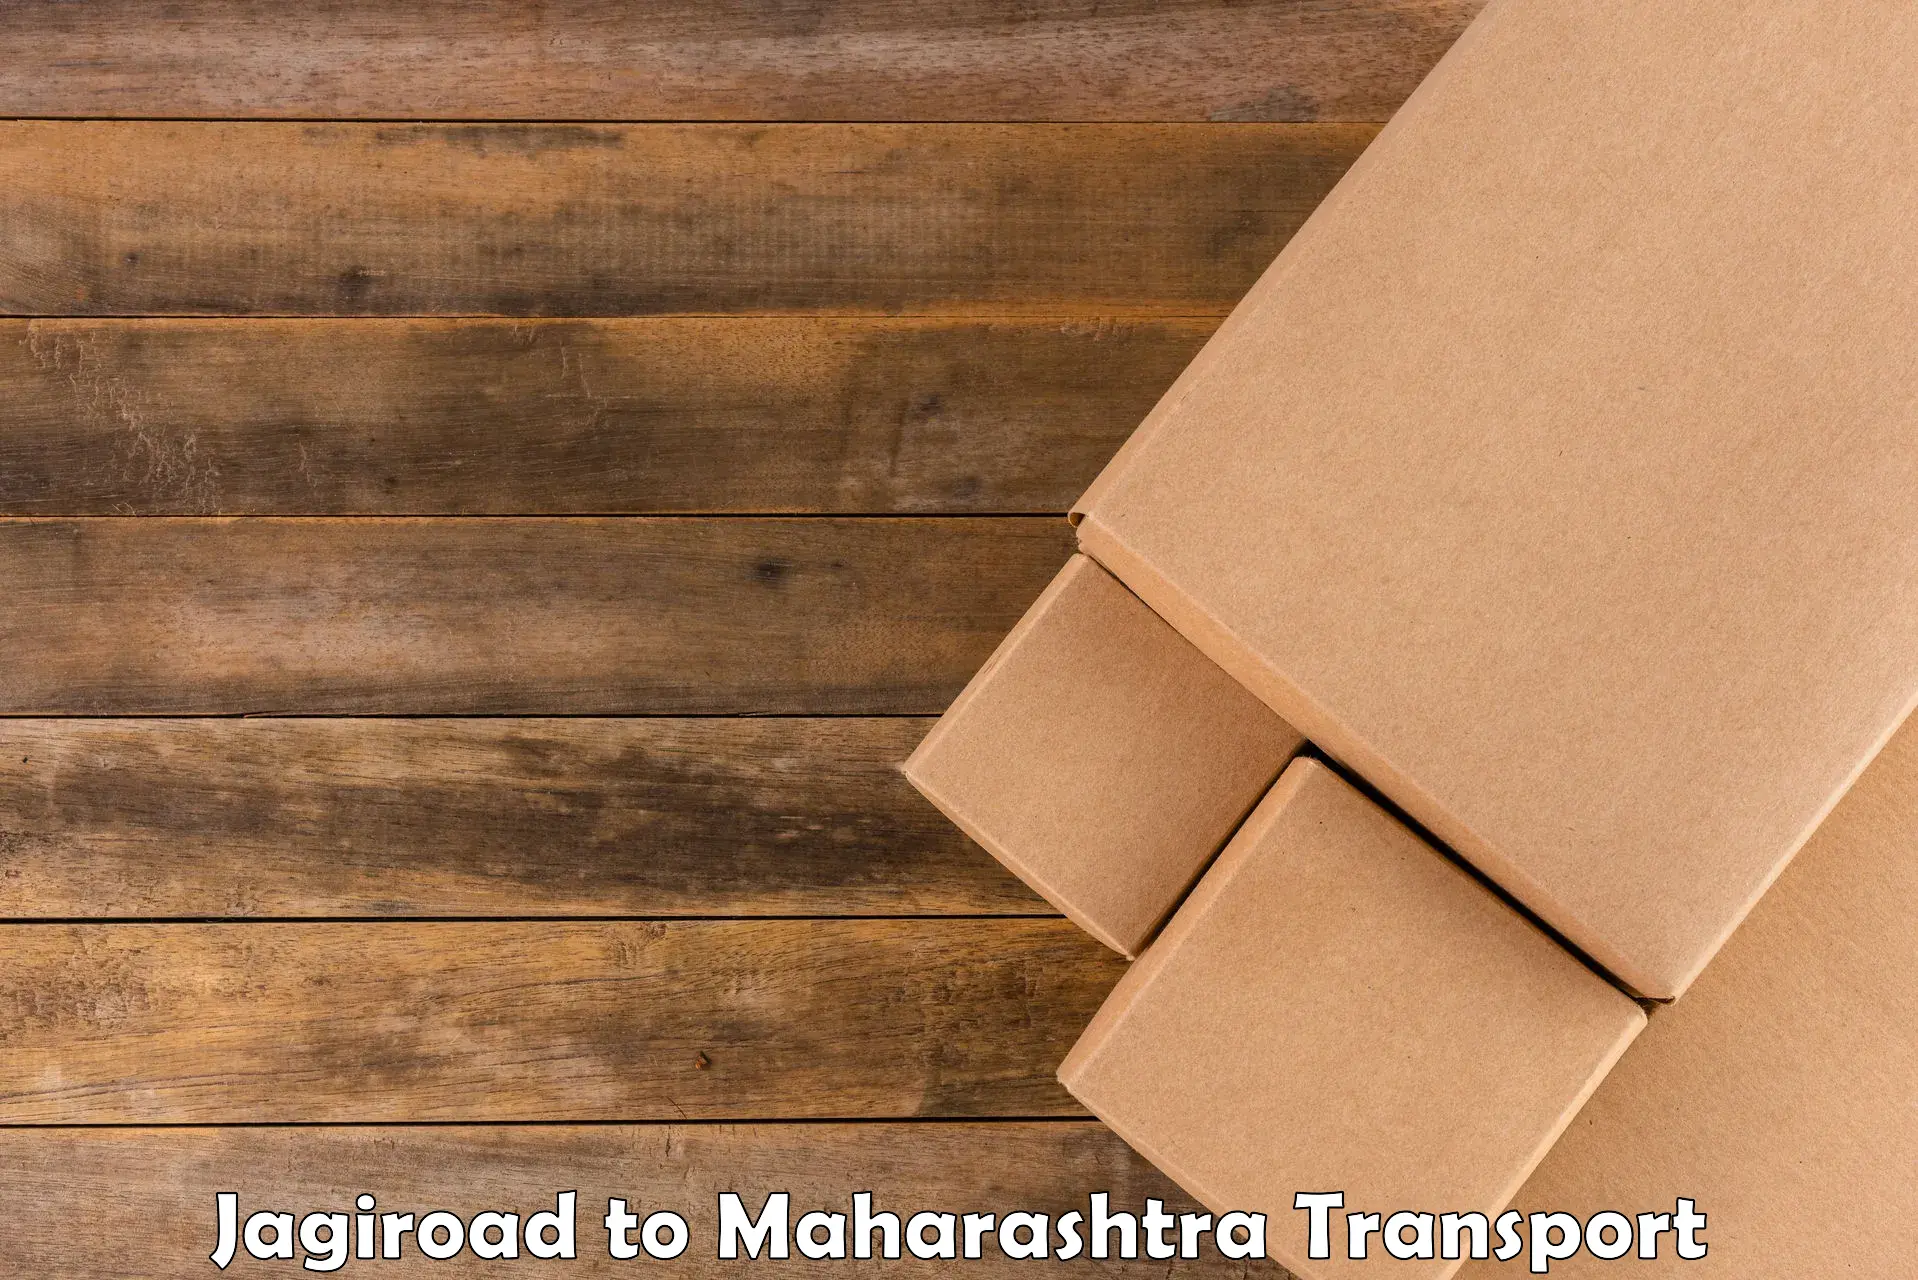 Air freight transport services Jagiroad to Mahim